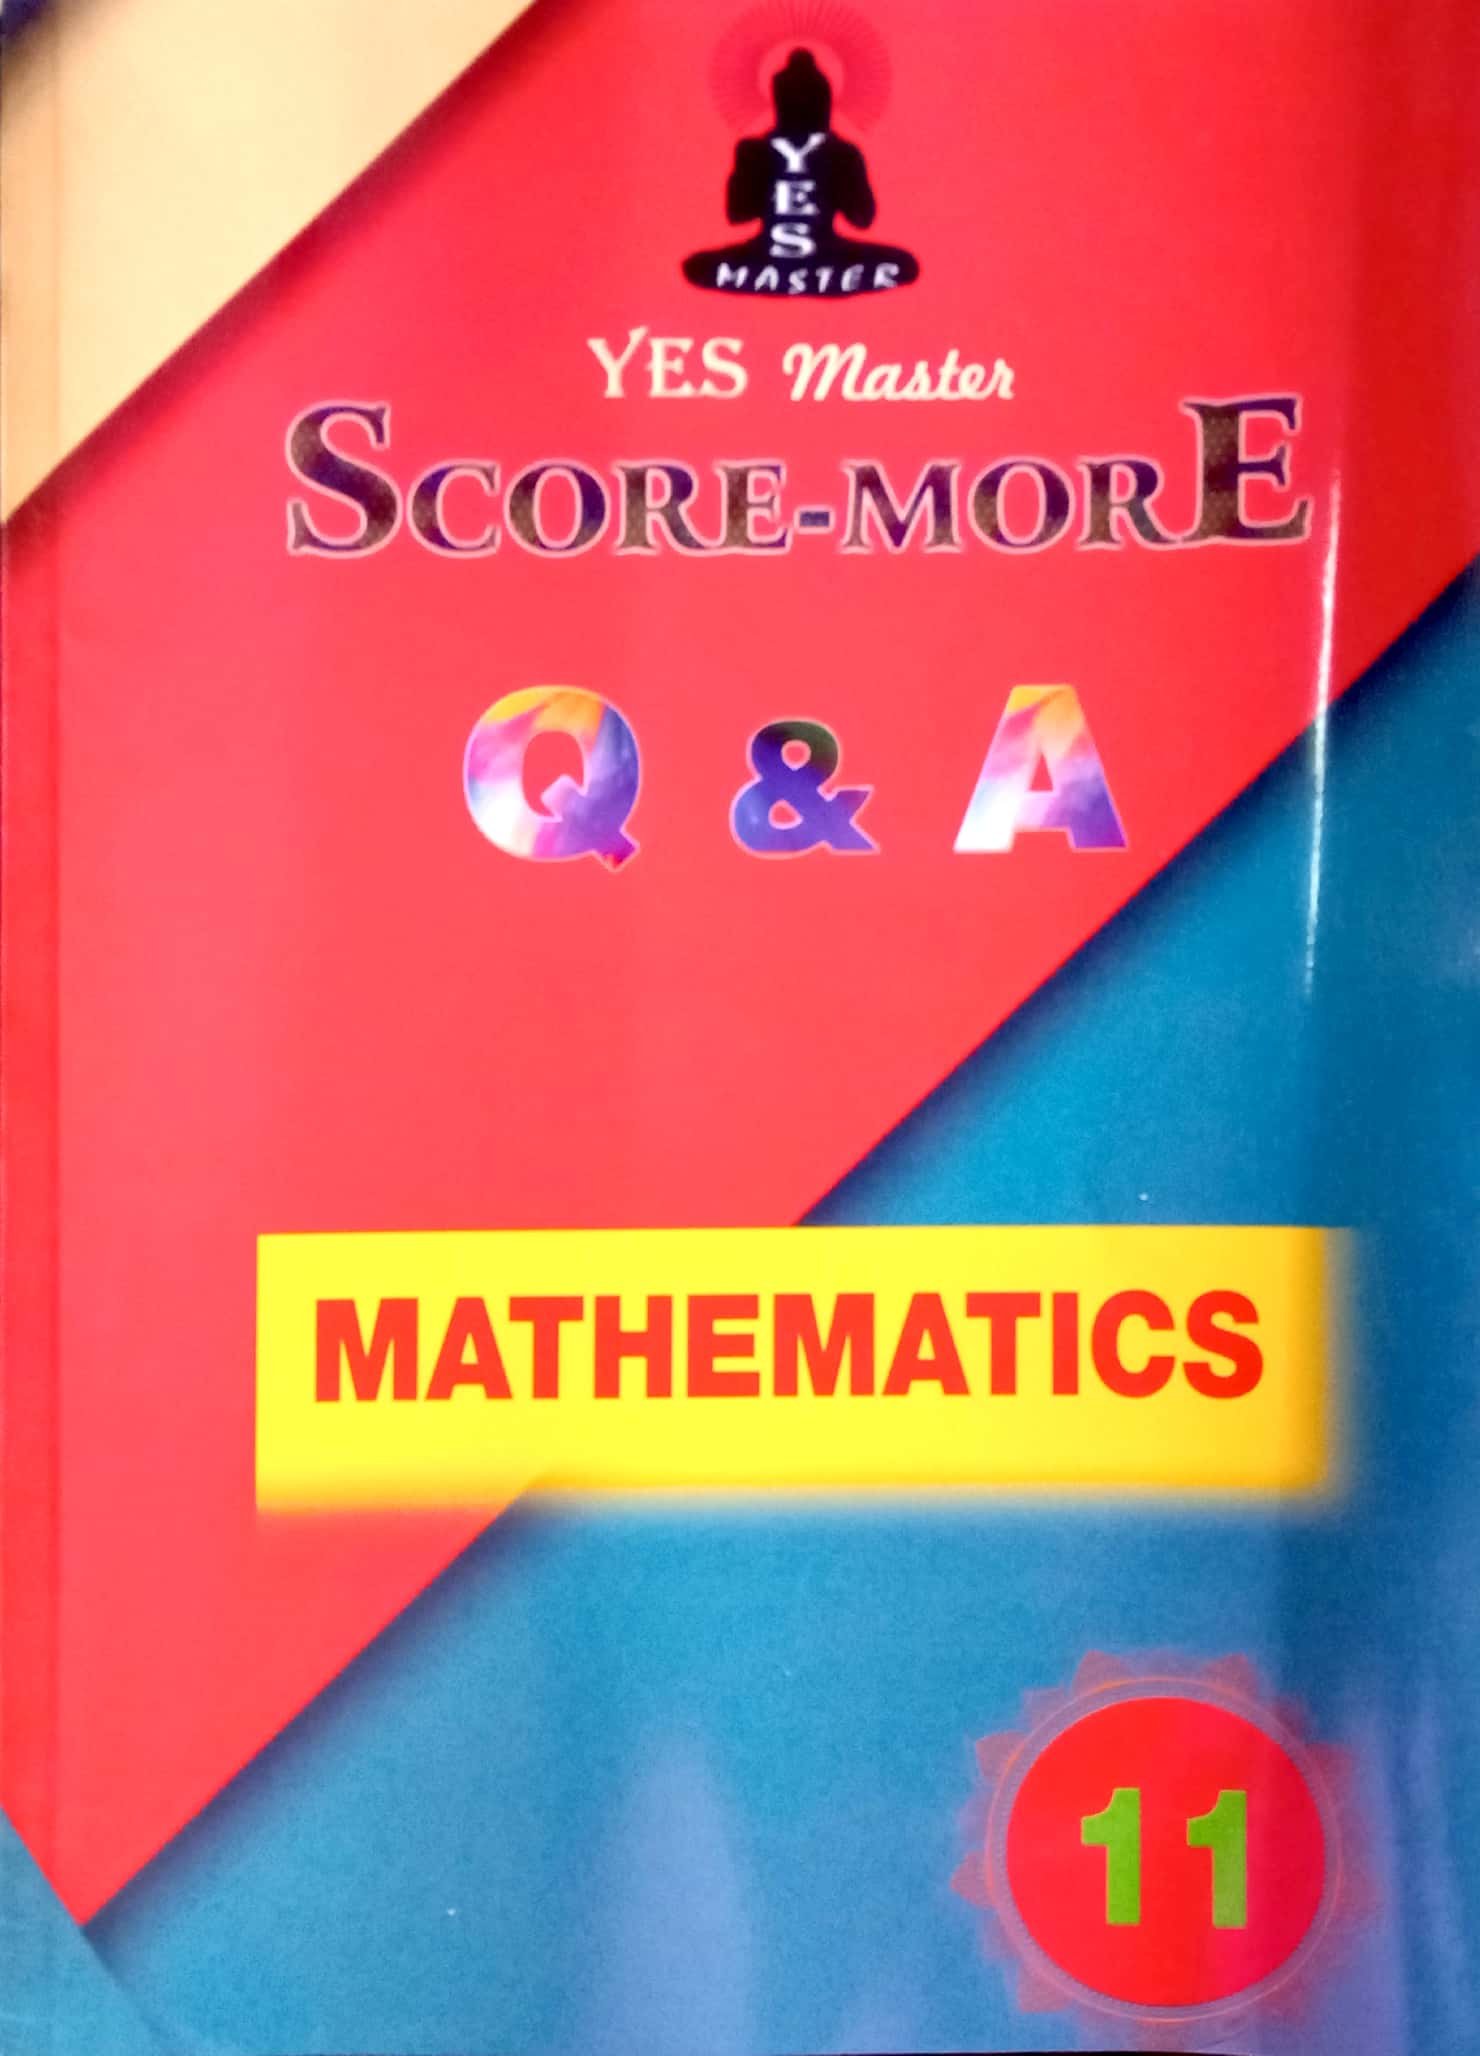 Routemybook Buy 11th Standard Yes Master [ScoreMore] Q&A Mathematics Guide by Premier's